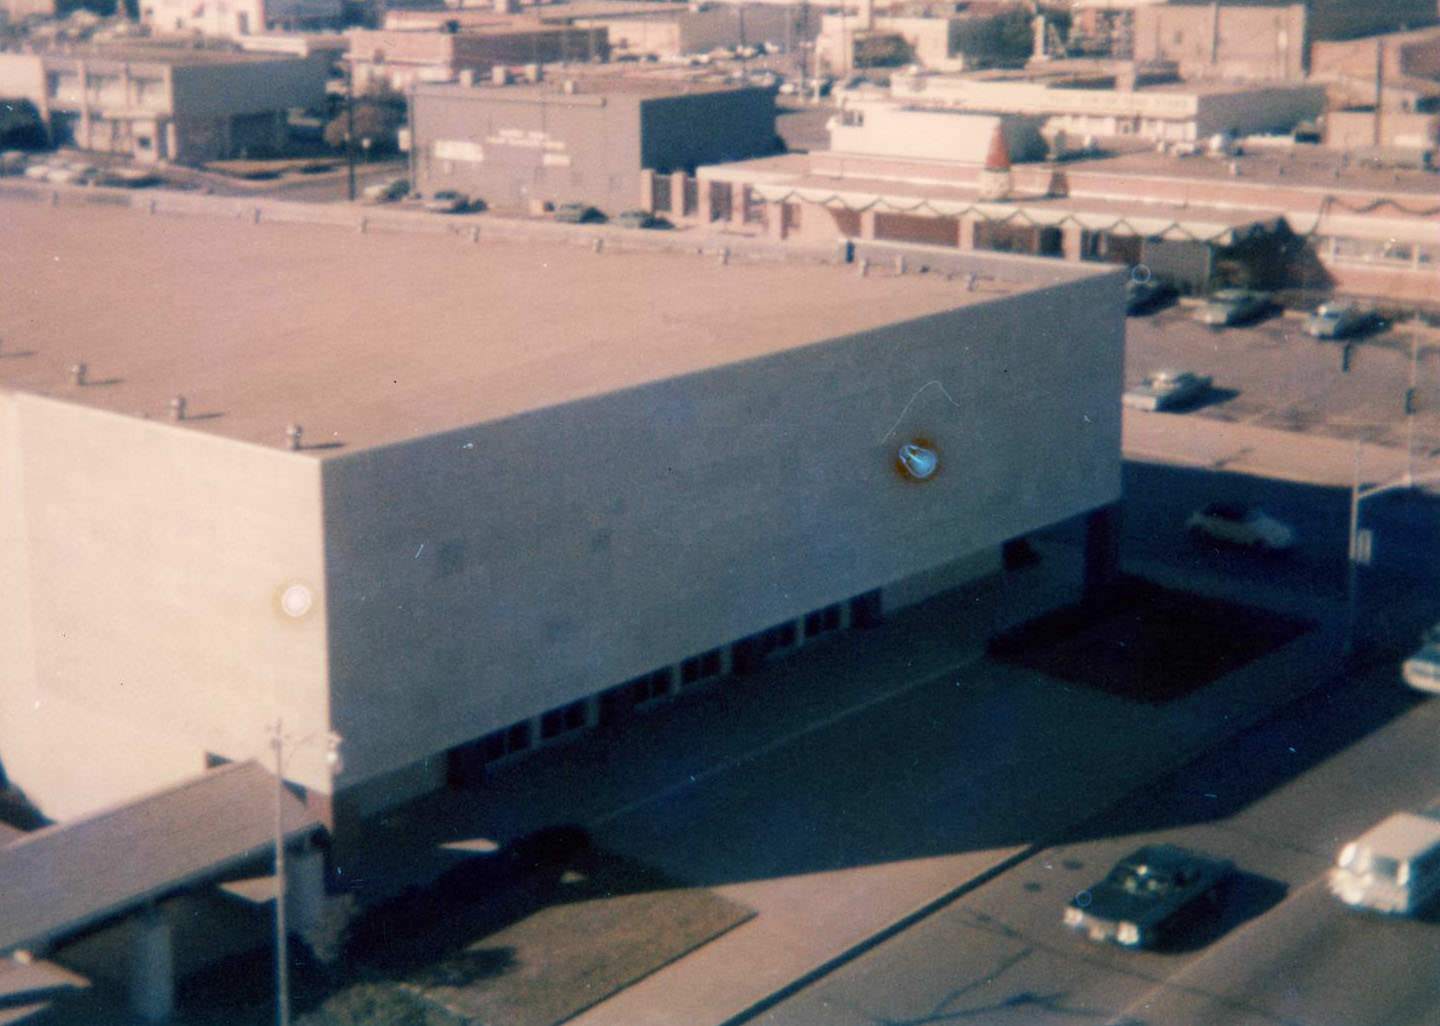 Downtown Arlington, 1973. The First Baptist Church. There are other buildings, cars, and streets.